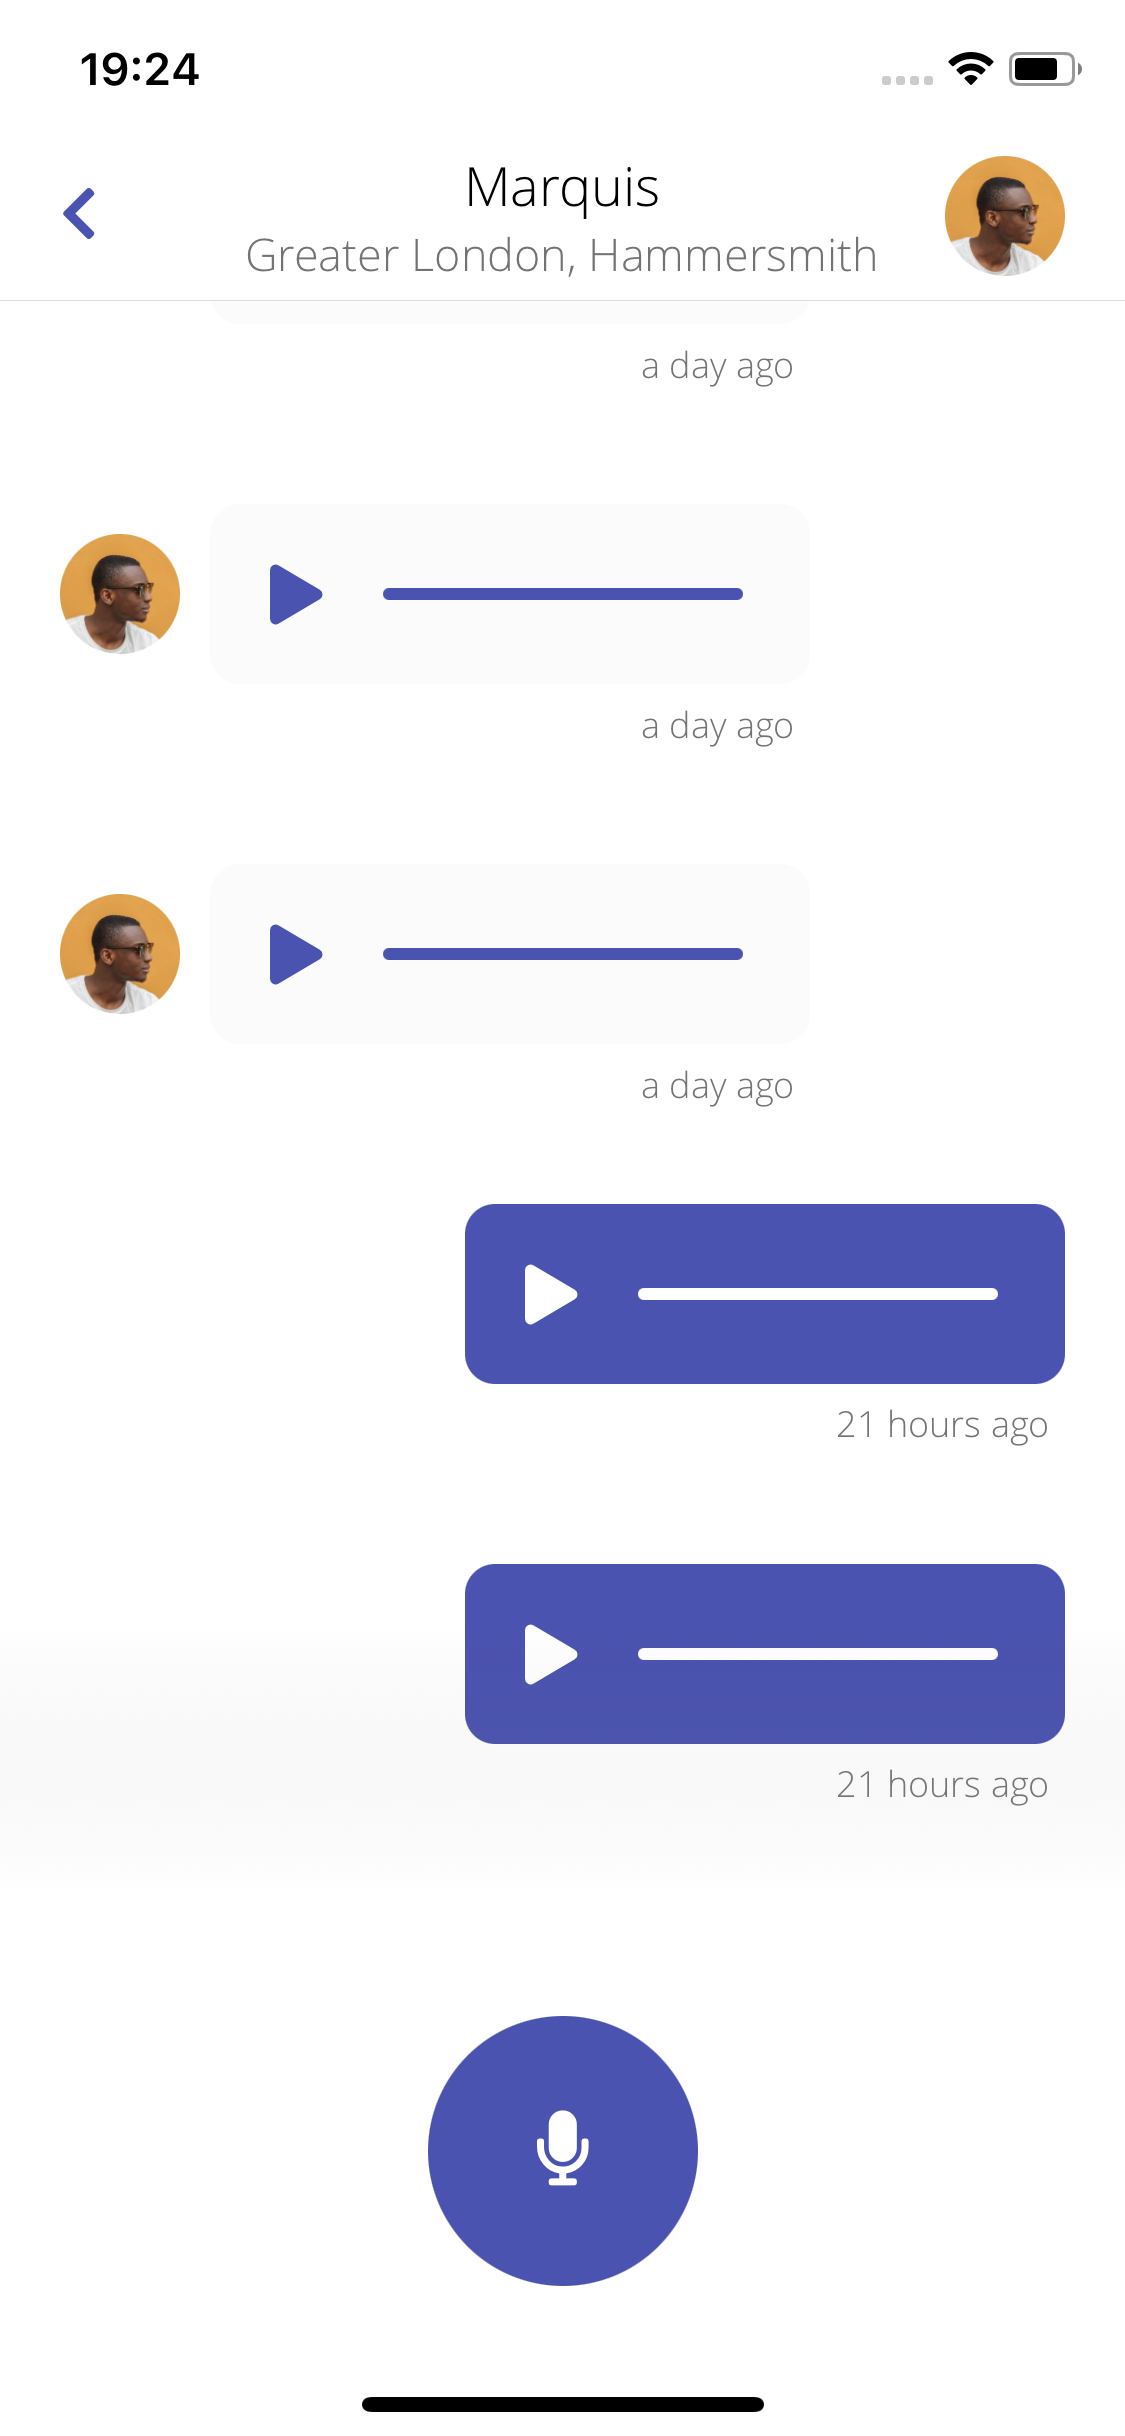 New dating app where you can only communicate using voice notes